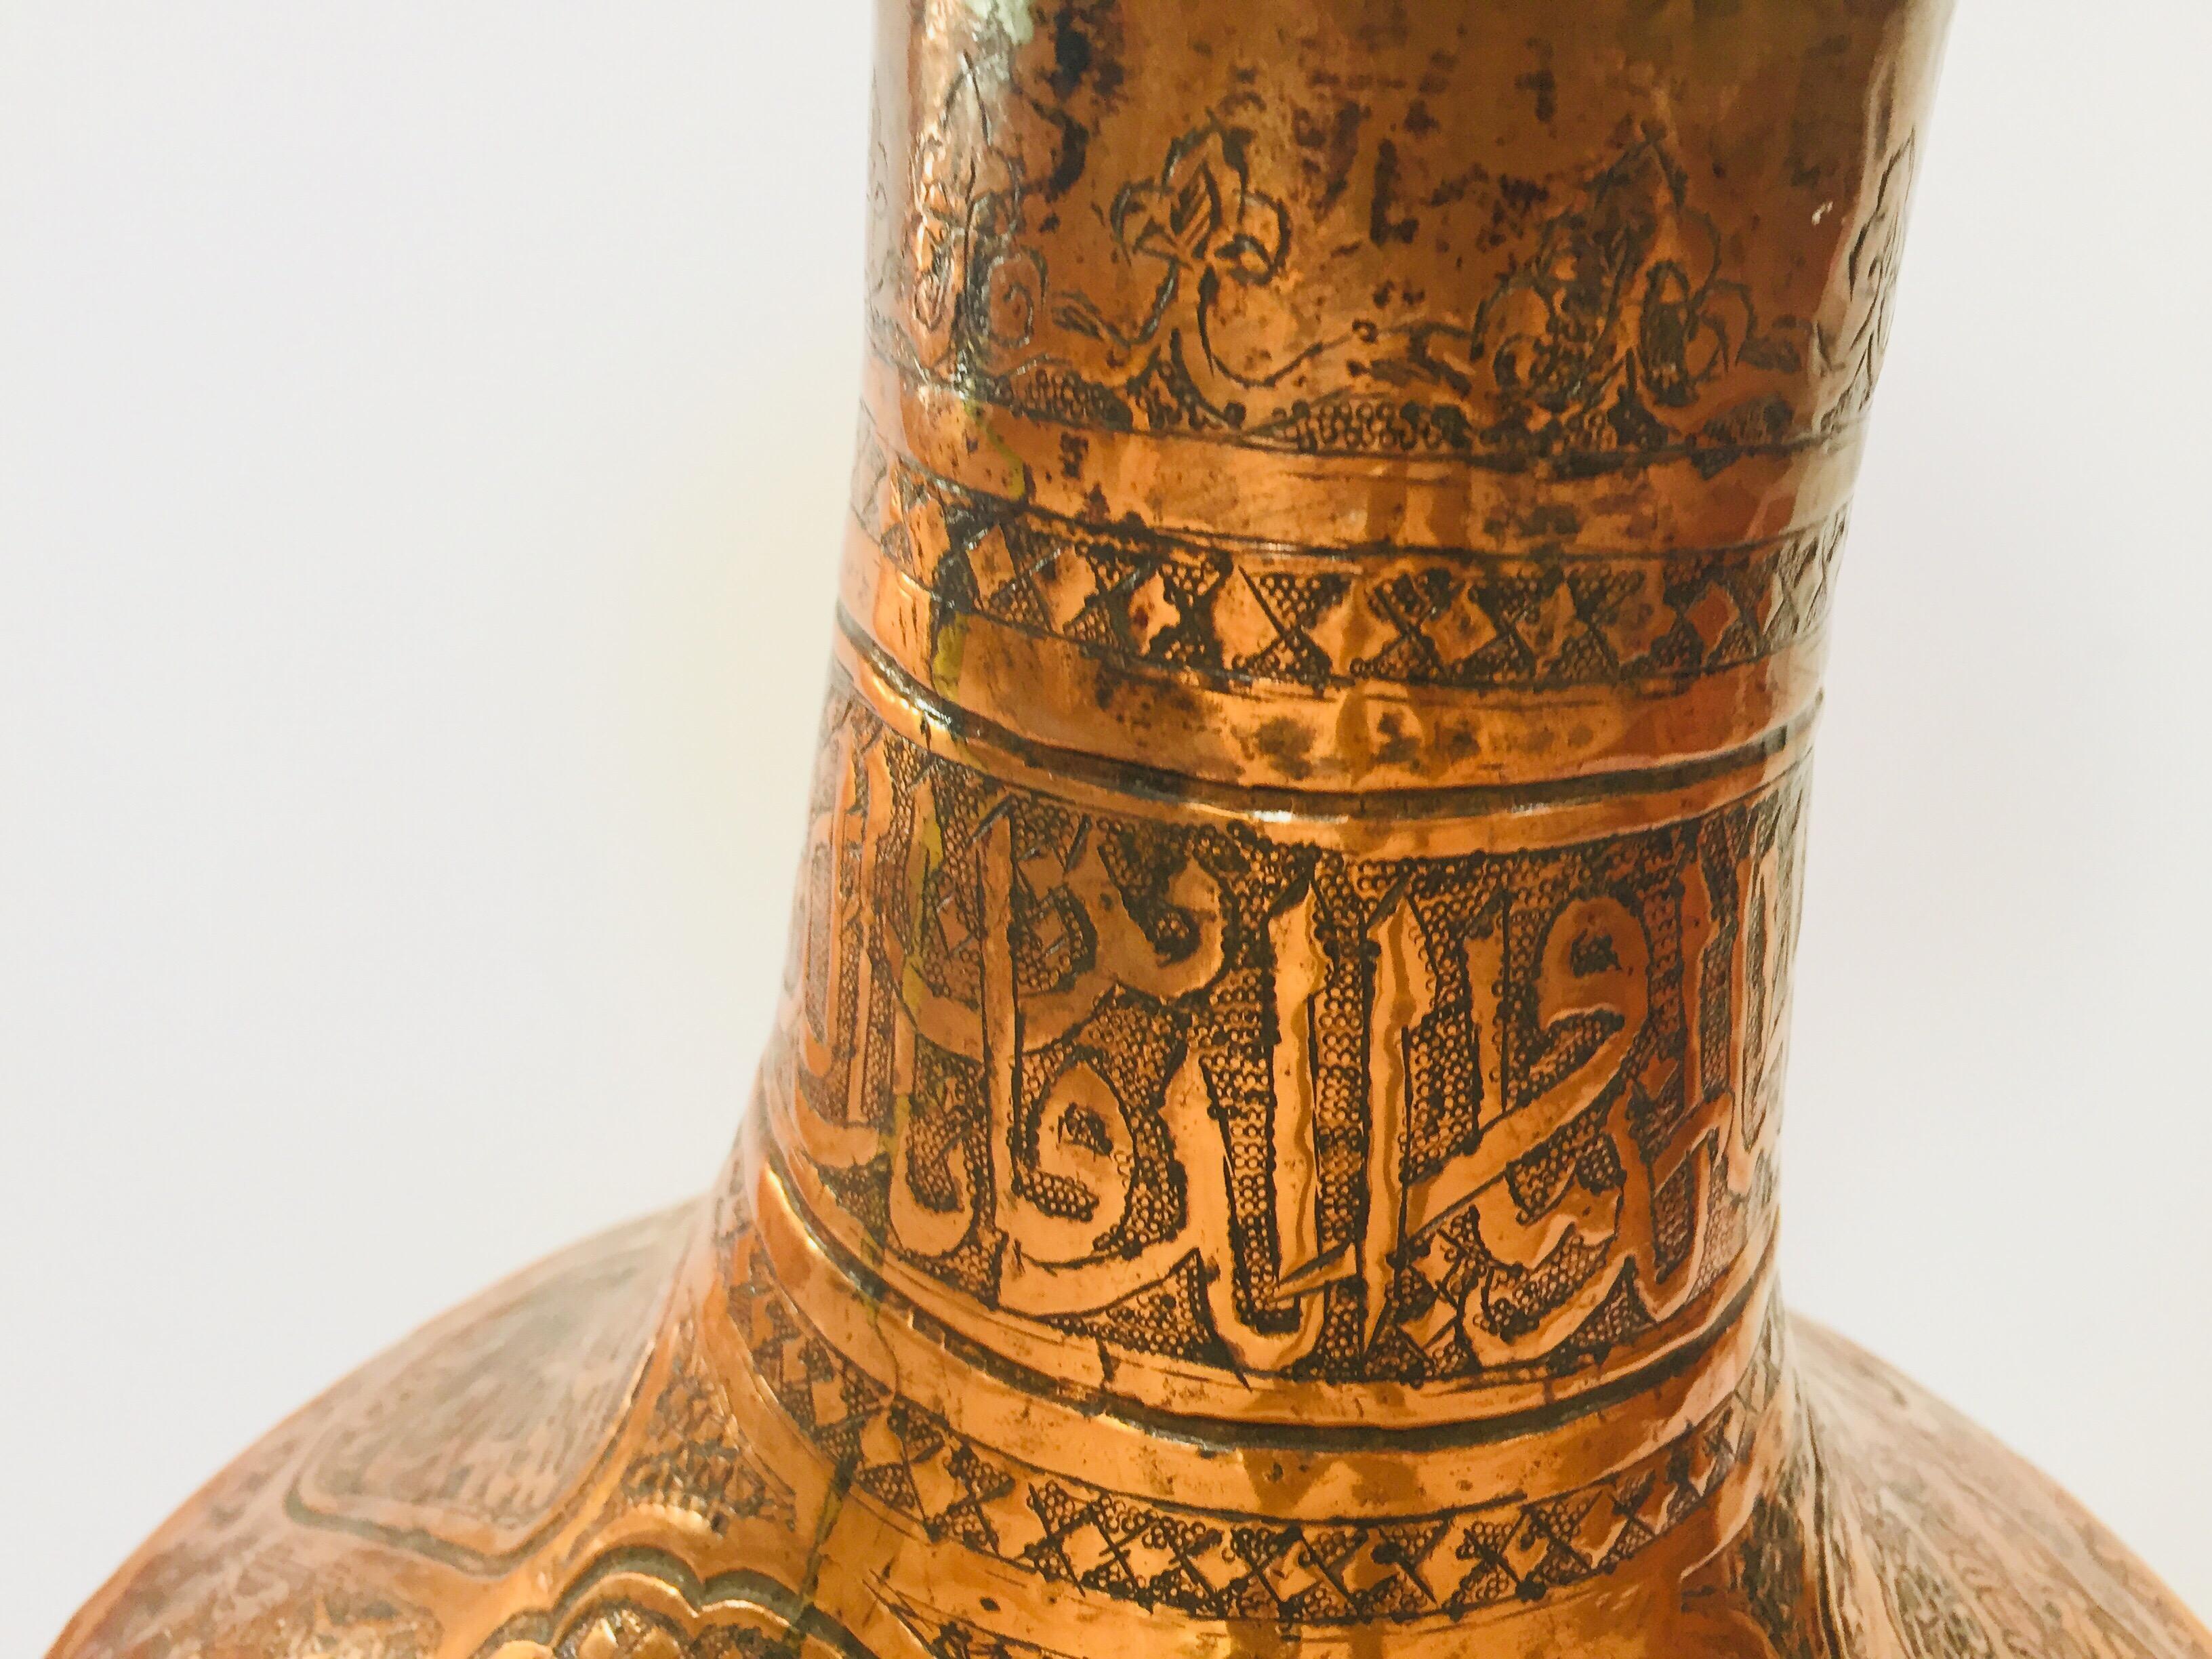 Brass Middle Eastern Syrian Copper Islamic Art Vase Engraved with Arabic Calligraphy